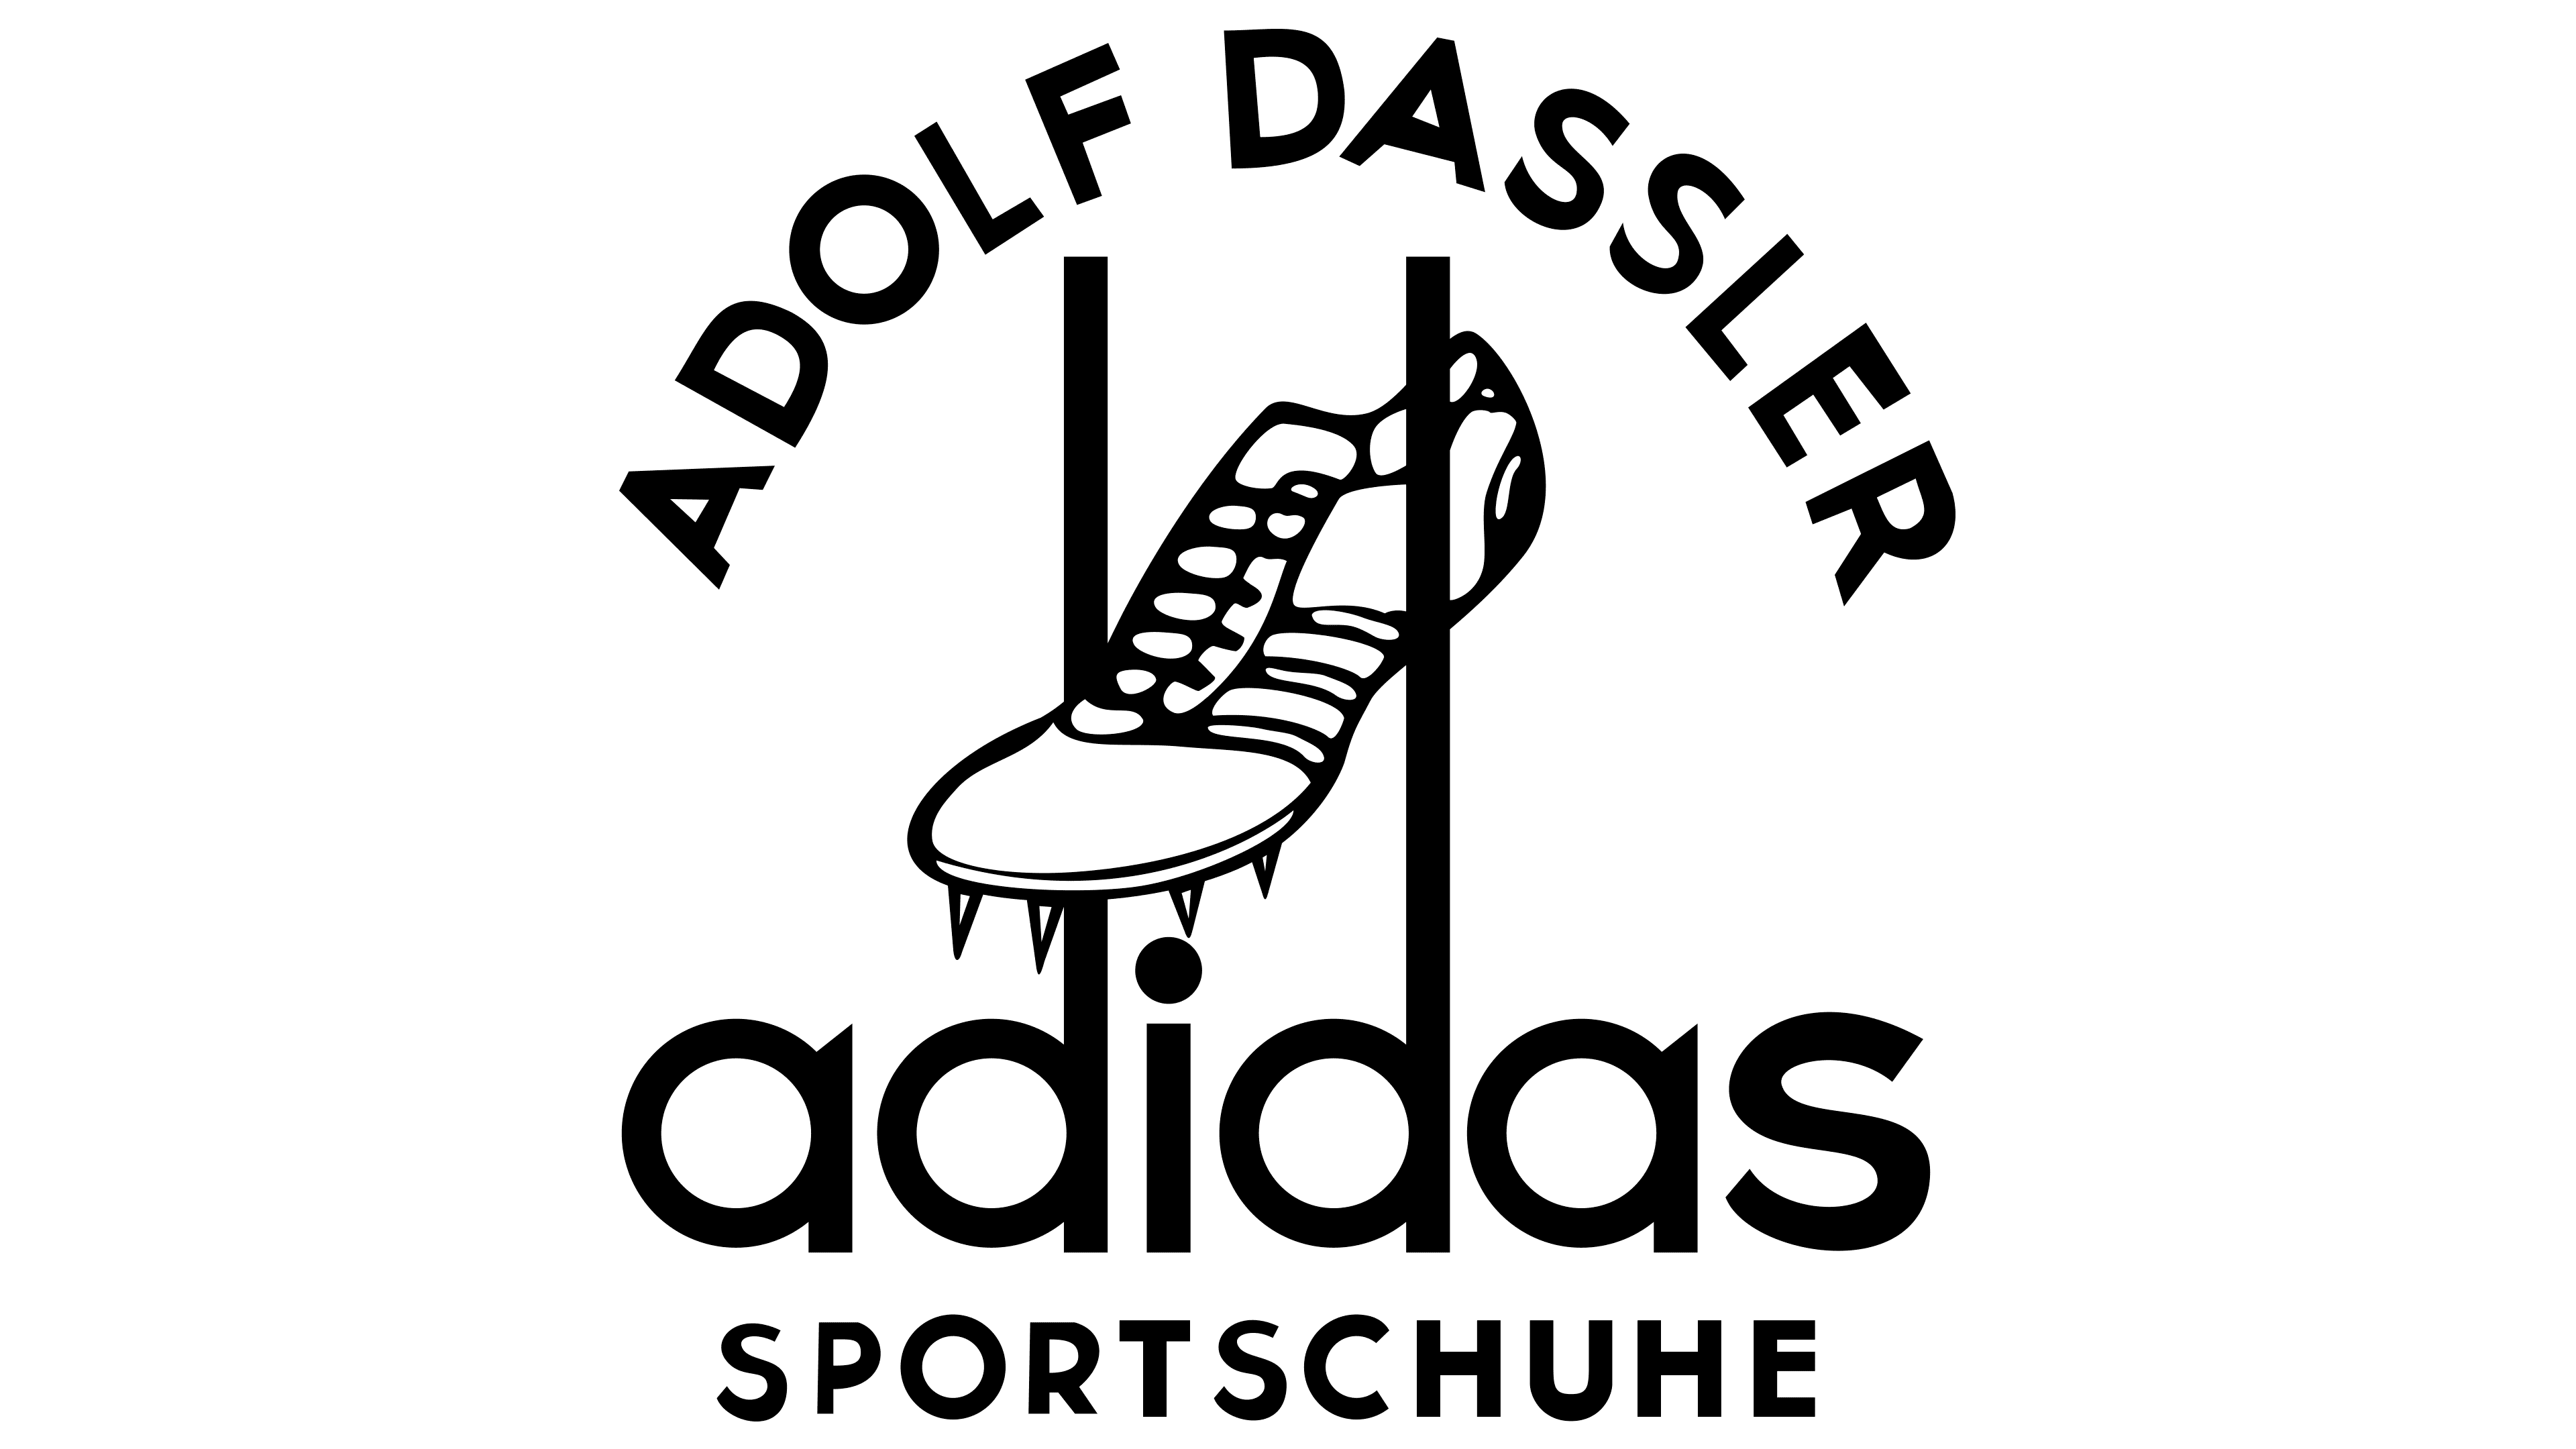 Adidas Logo | The most famous brands and company logos in the world